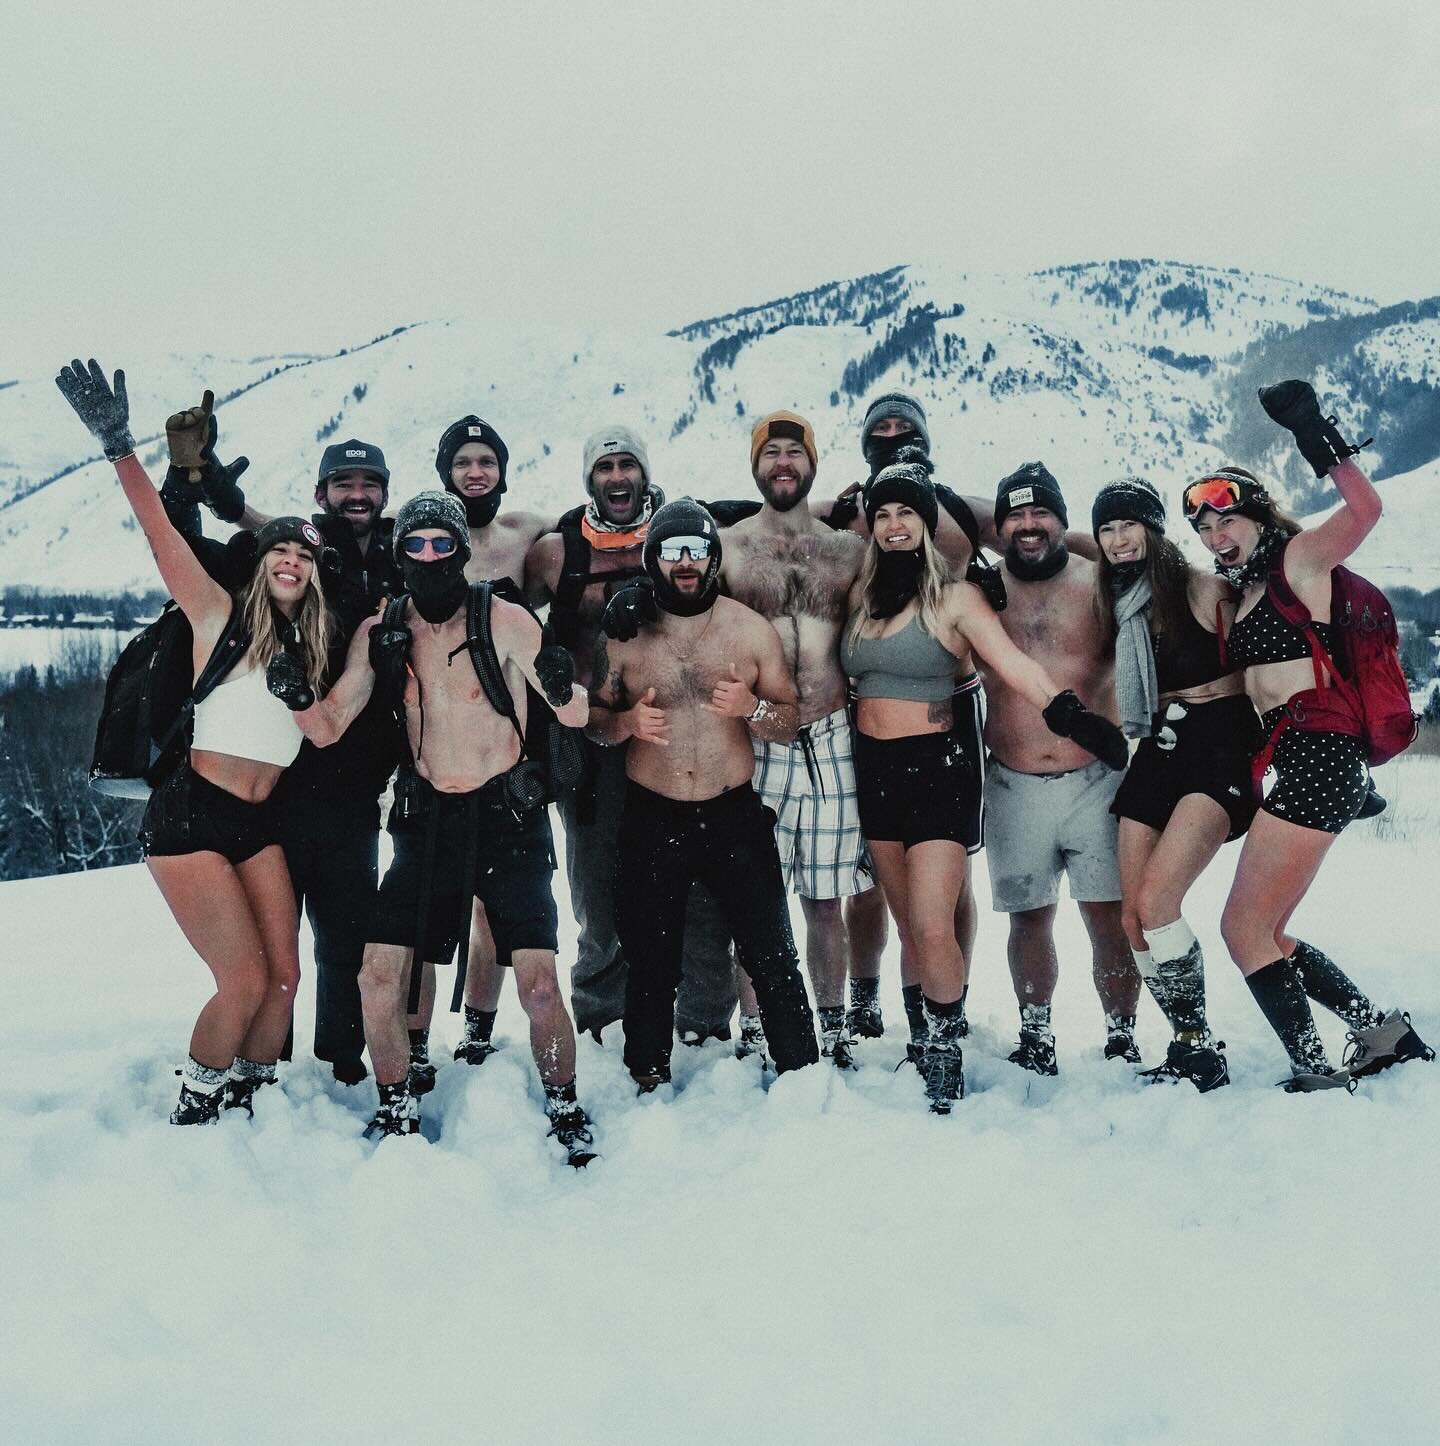 A retreat of a lifetime! We don&rsquo;t know our potential until we meet our edge and @edgetheorylabs winter retreat in Jackson Hole was one of the most amazing experiences of my life. The cold has a unique way of waking up our inner life force by te